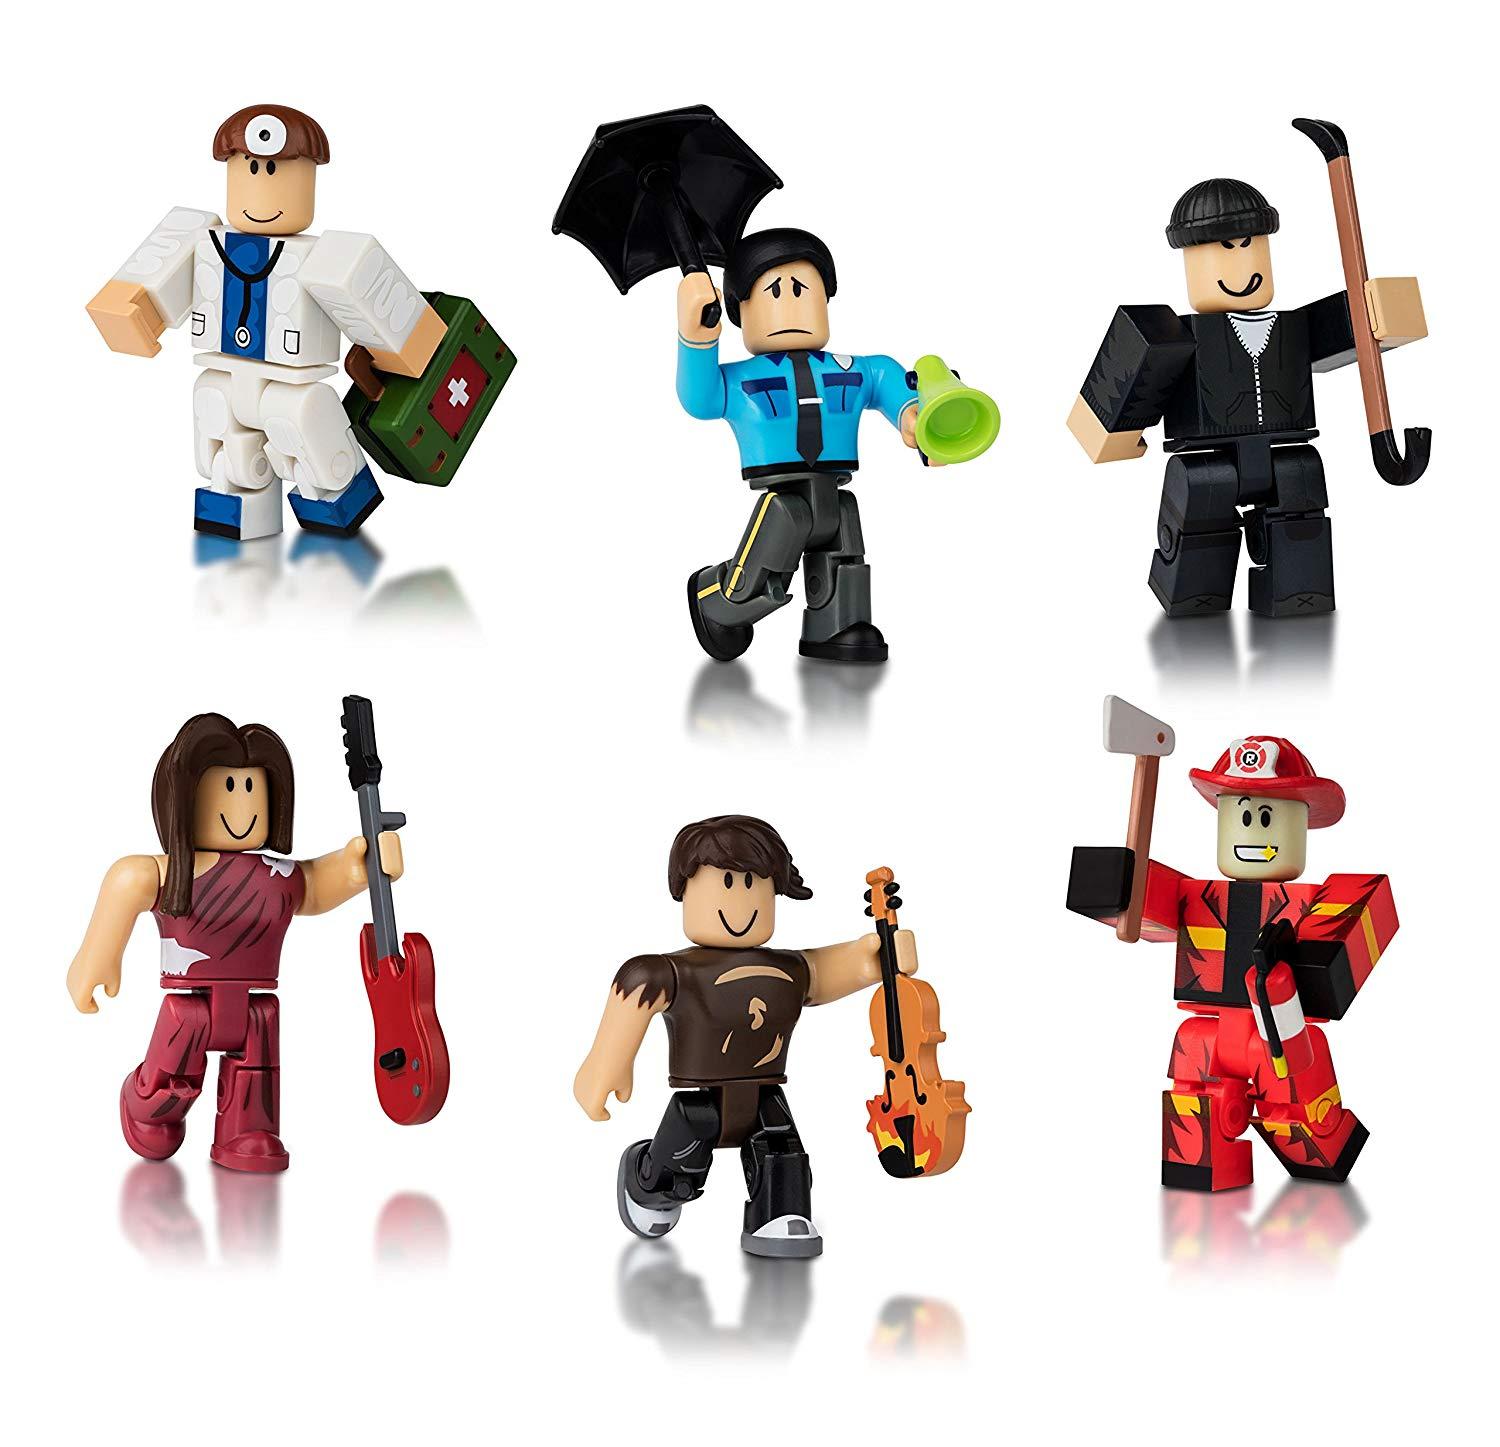 Roblox Citizens Of Roblox 6 Figure Pack For Kids - roblox booga booga fire ant single figure core pack with exclusive virtual item code